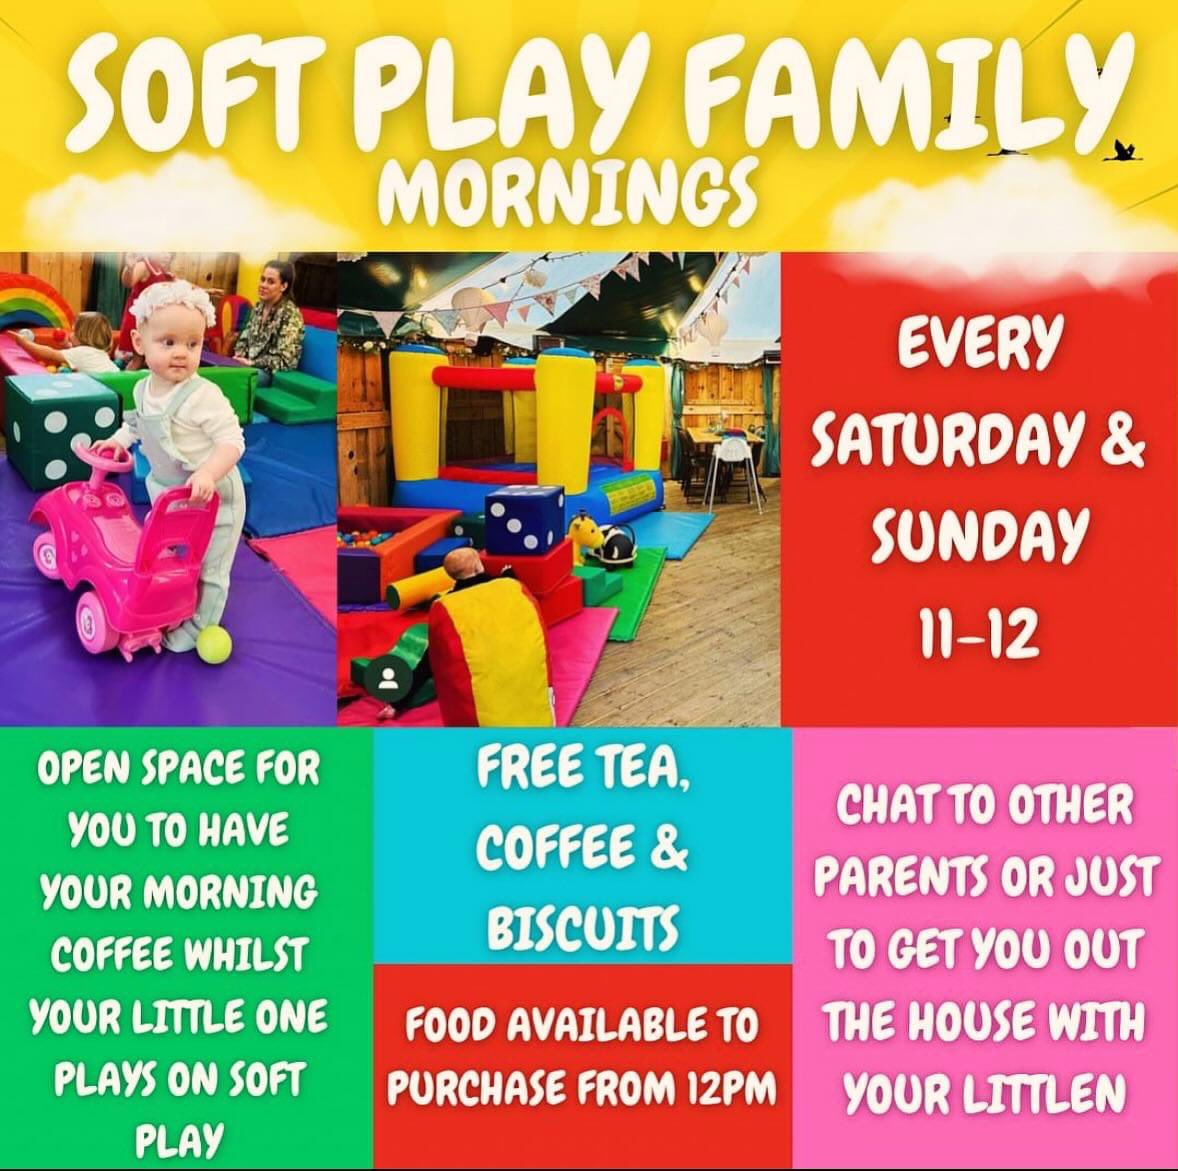 FREE SOFT-PLAY FAMILY MORNINGS at the Imaginarium Roundhouse 11am - 12pm every Saturday & Sunday. 🎪 Then stay for Saturday Children’s Crafternoons with artist Jennie Wishart 12-1pm. Free tea, coffee & biscuits. @cultureKnowsley @Knowsley_EYS @KnowsleyNhoods @TownPrescot